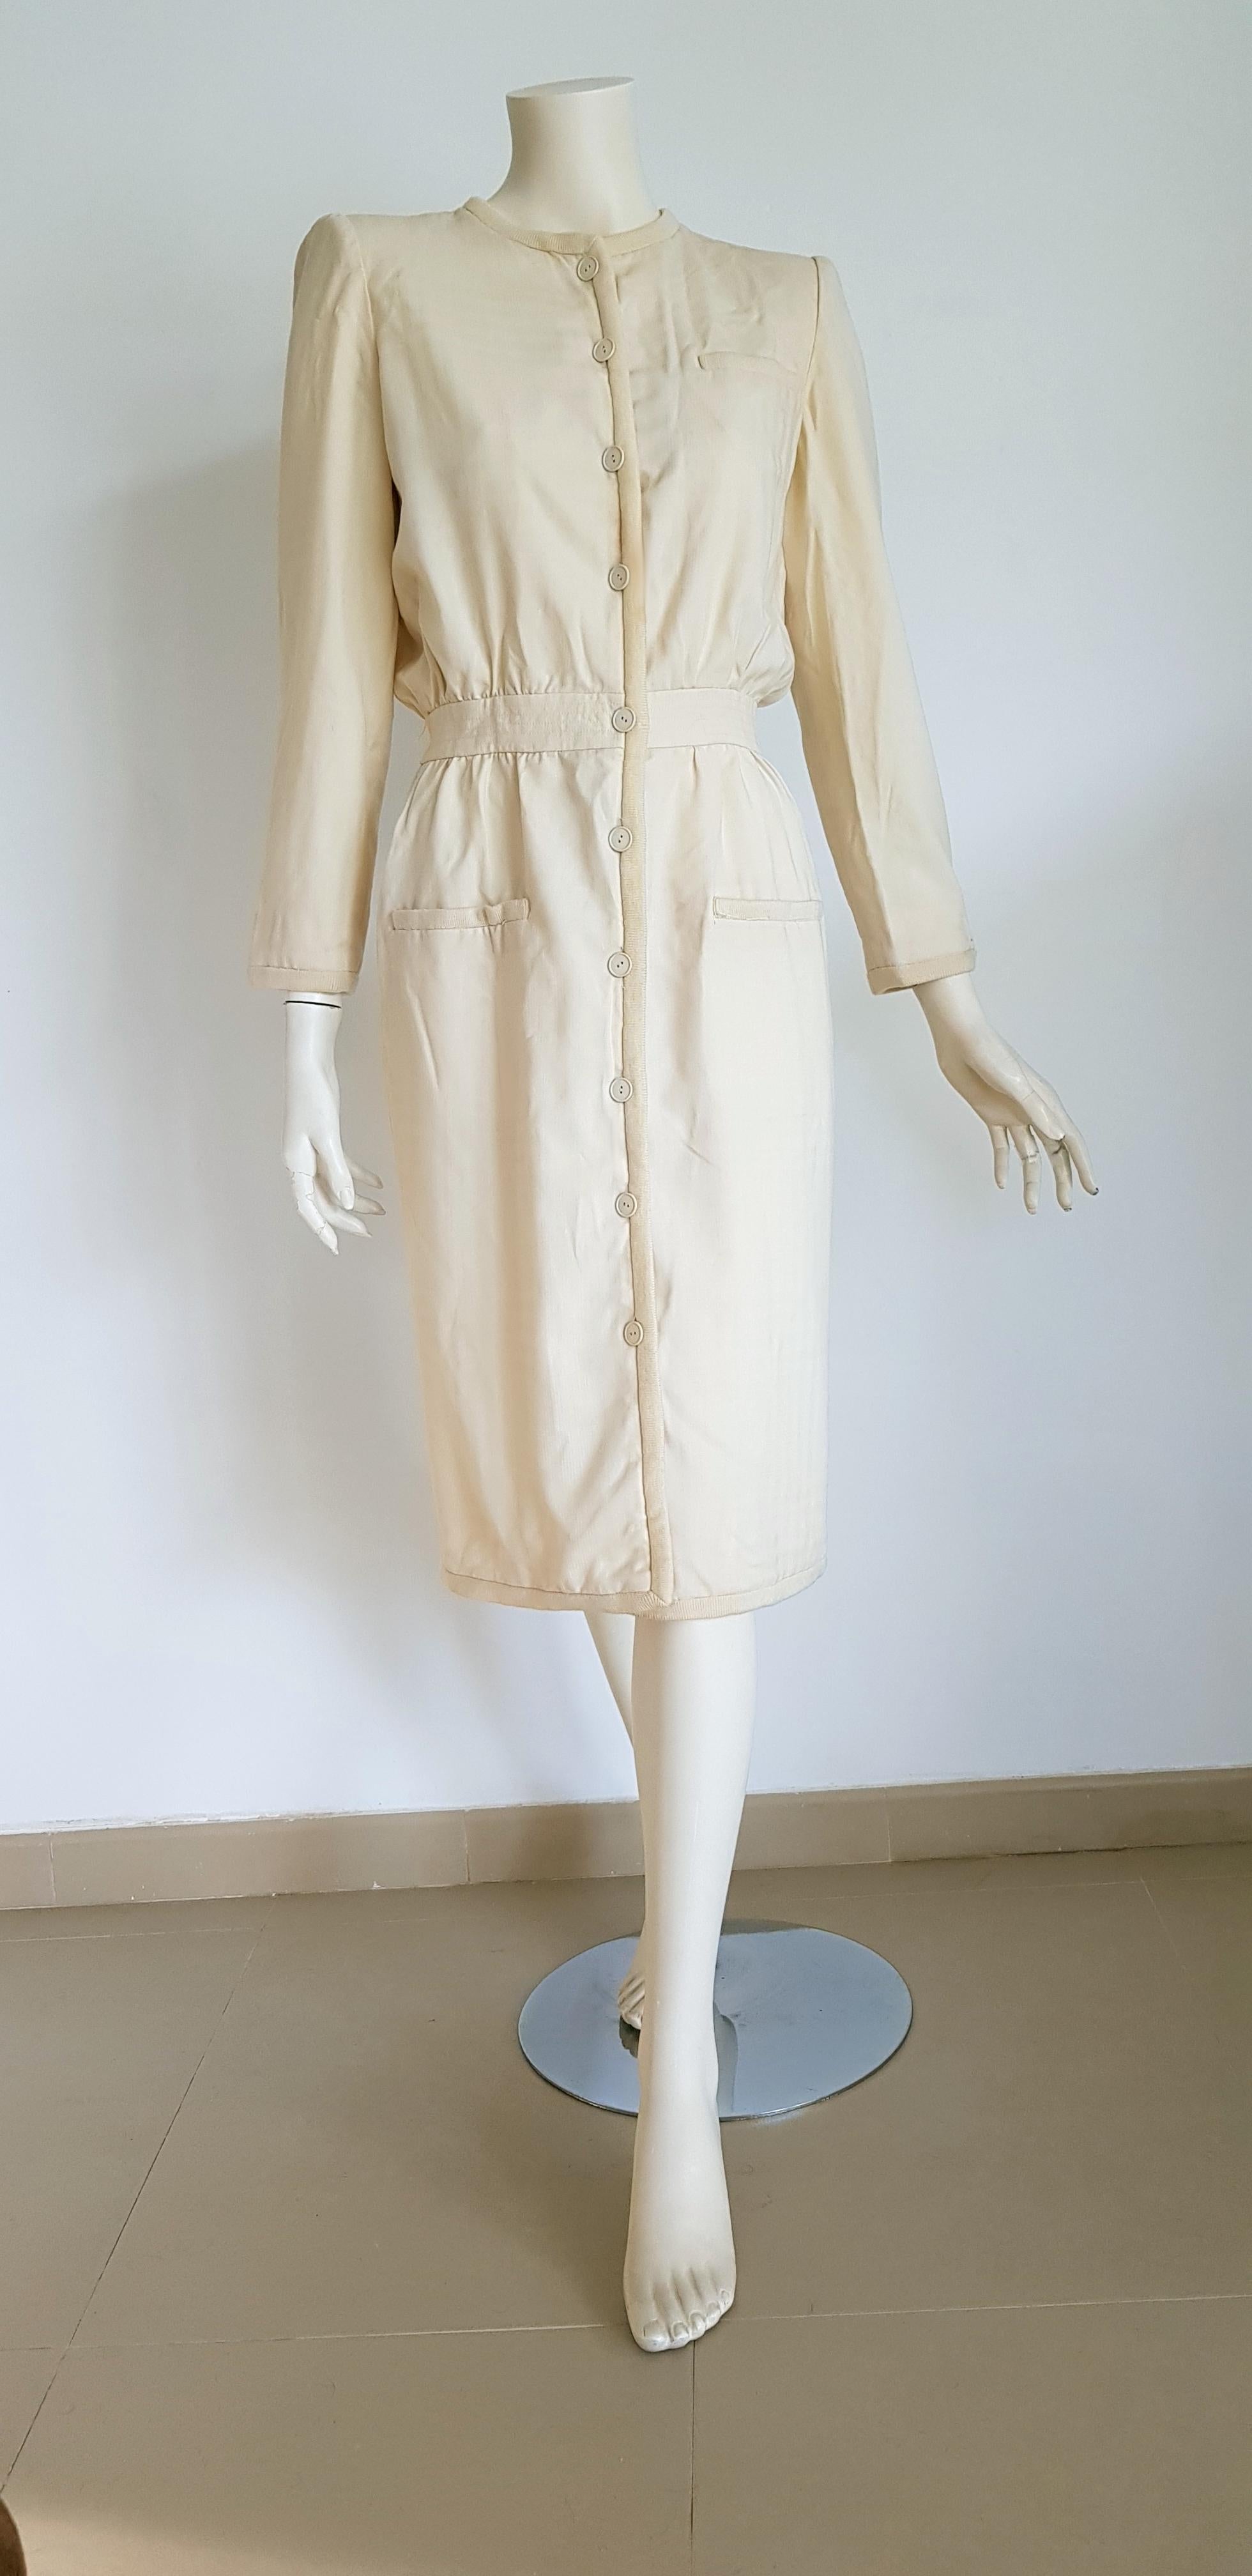 VALENTINO white cream silk and wool dress silk lined with buttons - Unworn

SIZE: equivalent to about Small / Medium, please review approx measurements as follows in cm: lenght 110, chest underarm to underarm 50, bust circumference 92, shoulder from